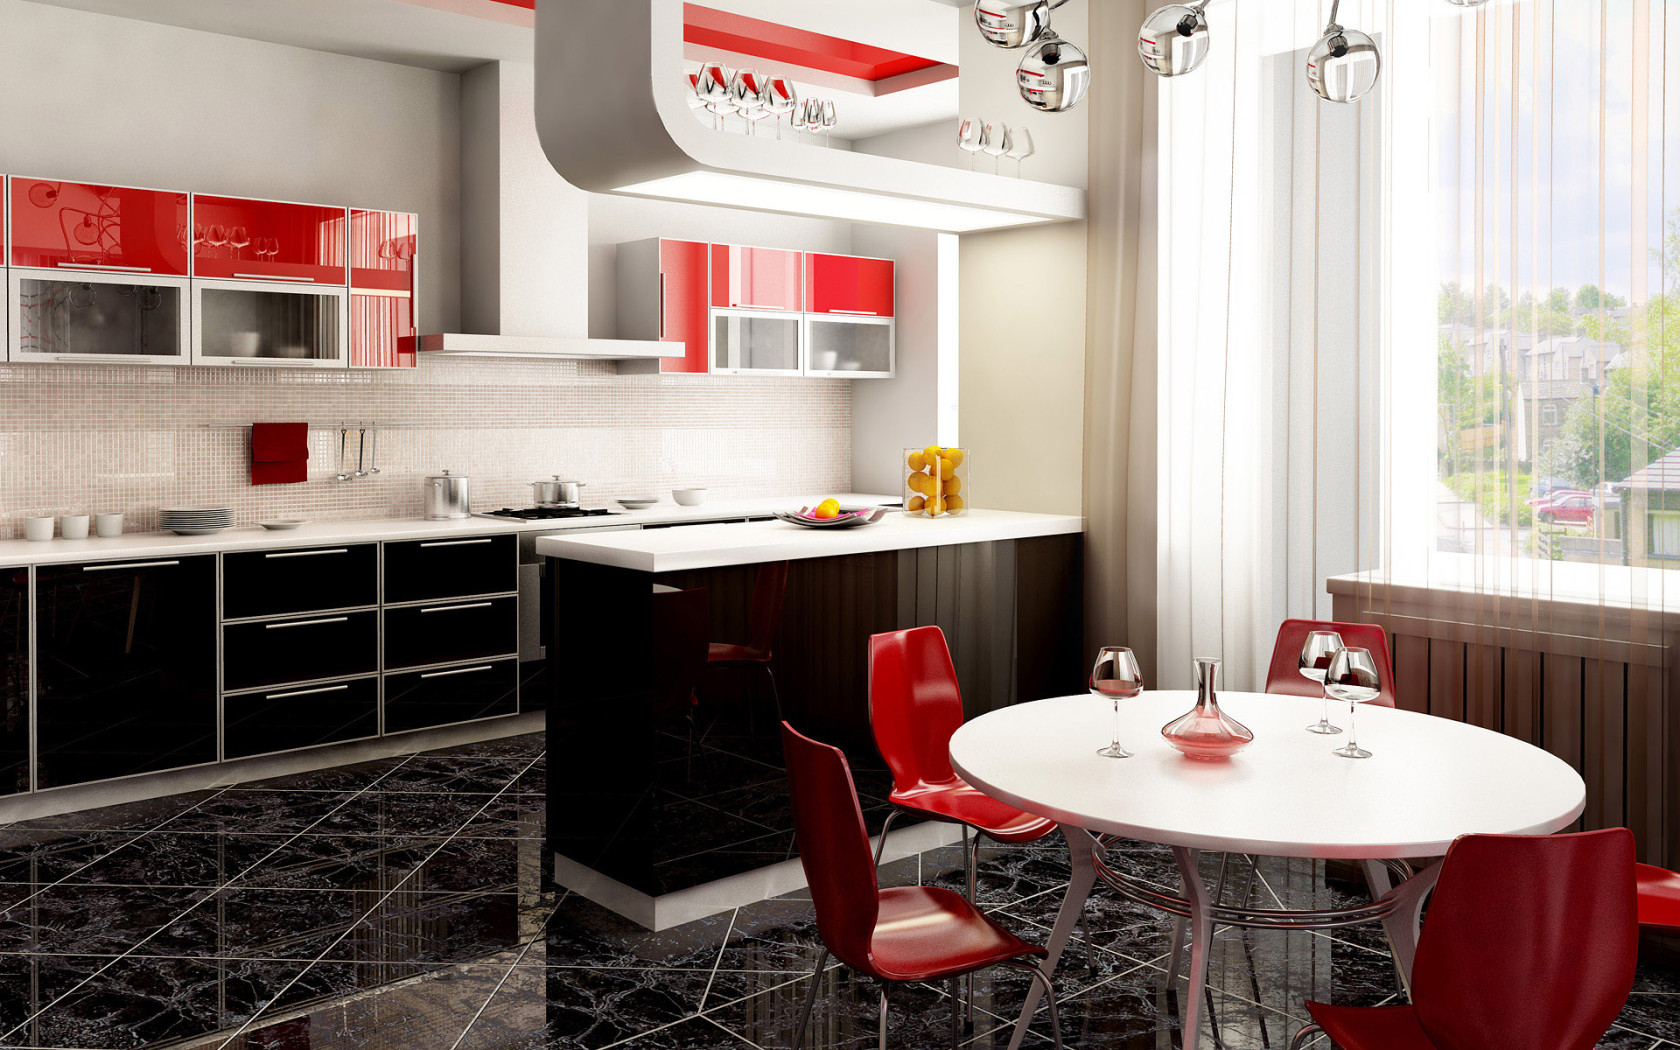 The kitchen and dining room / red and black